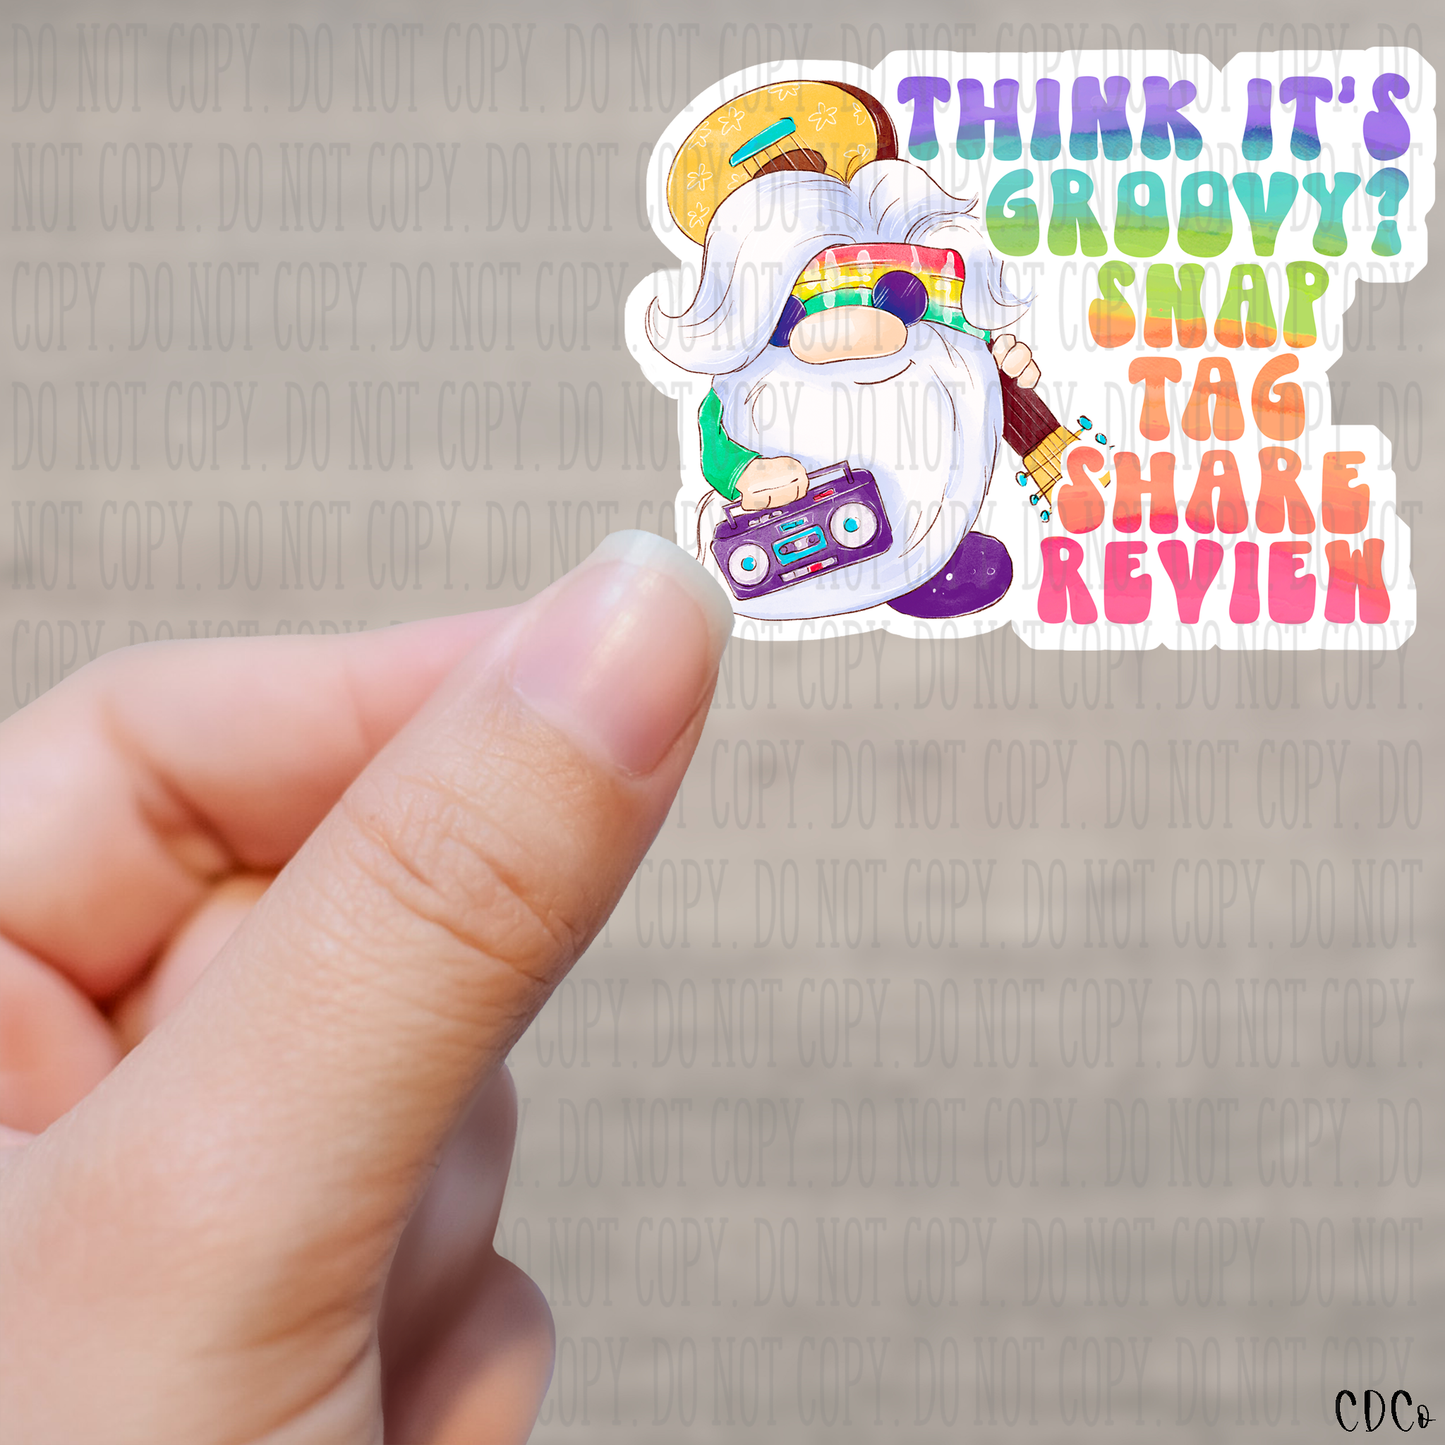 Think It's Groovy? Snap Tag Share Review Kiss Cut Sticker Sheet